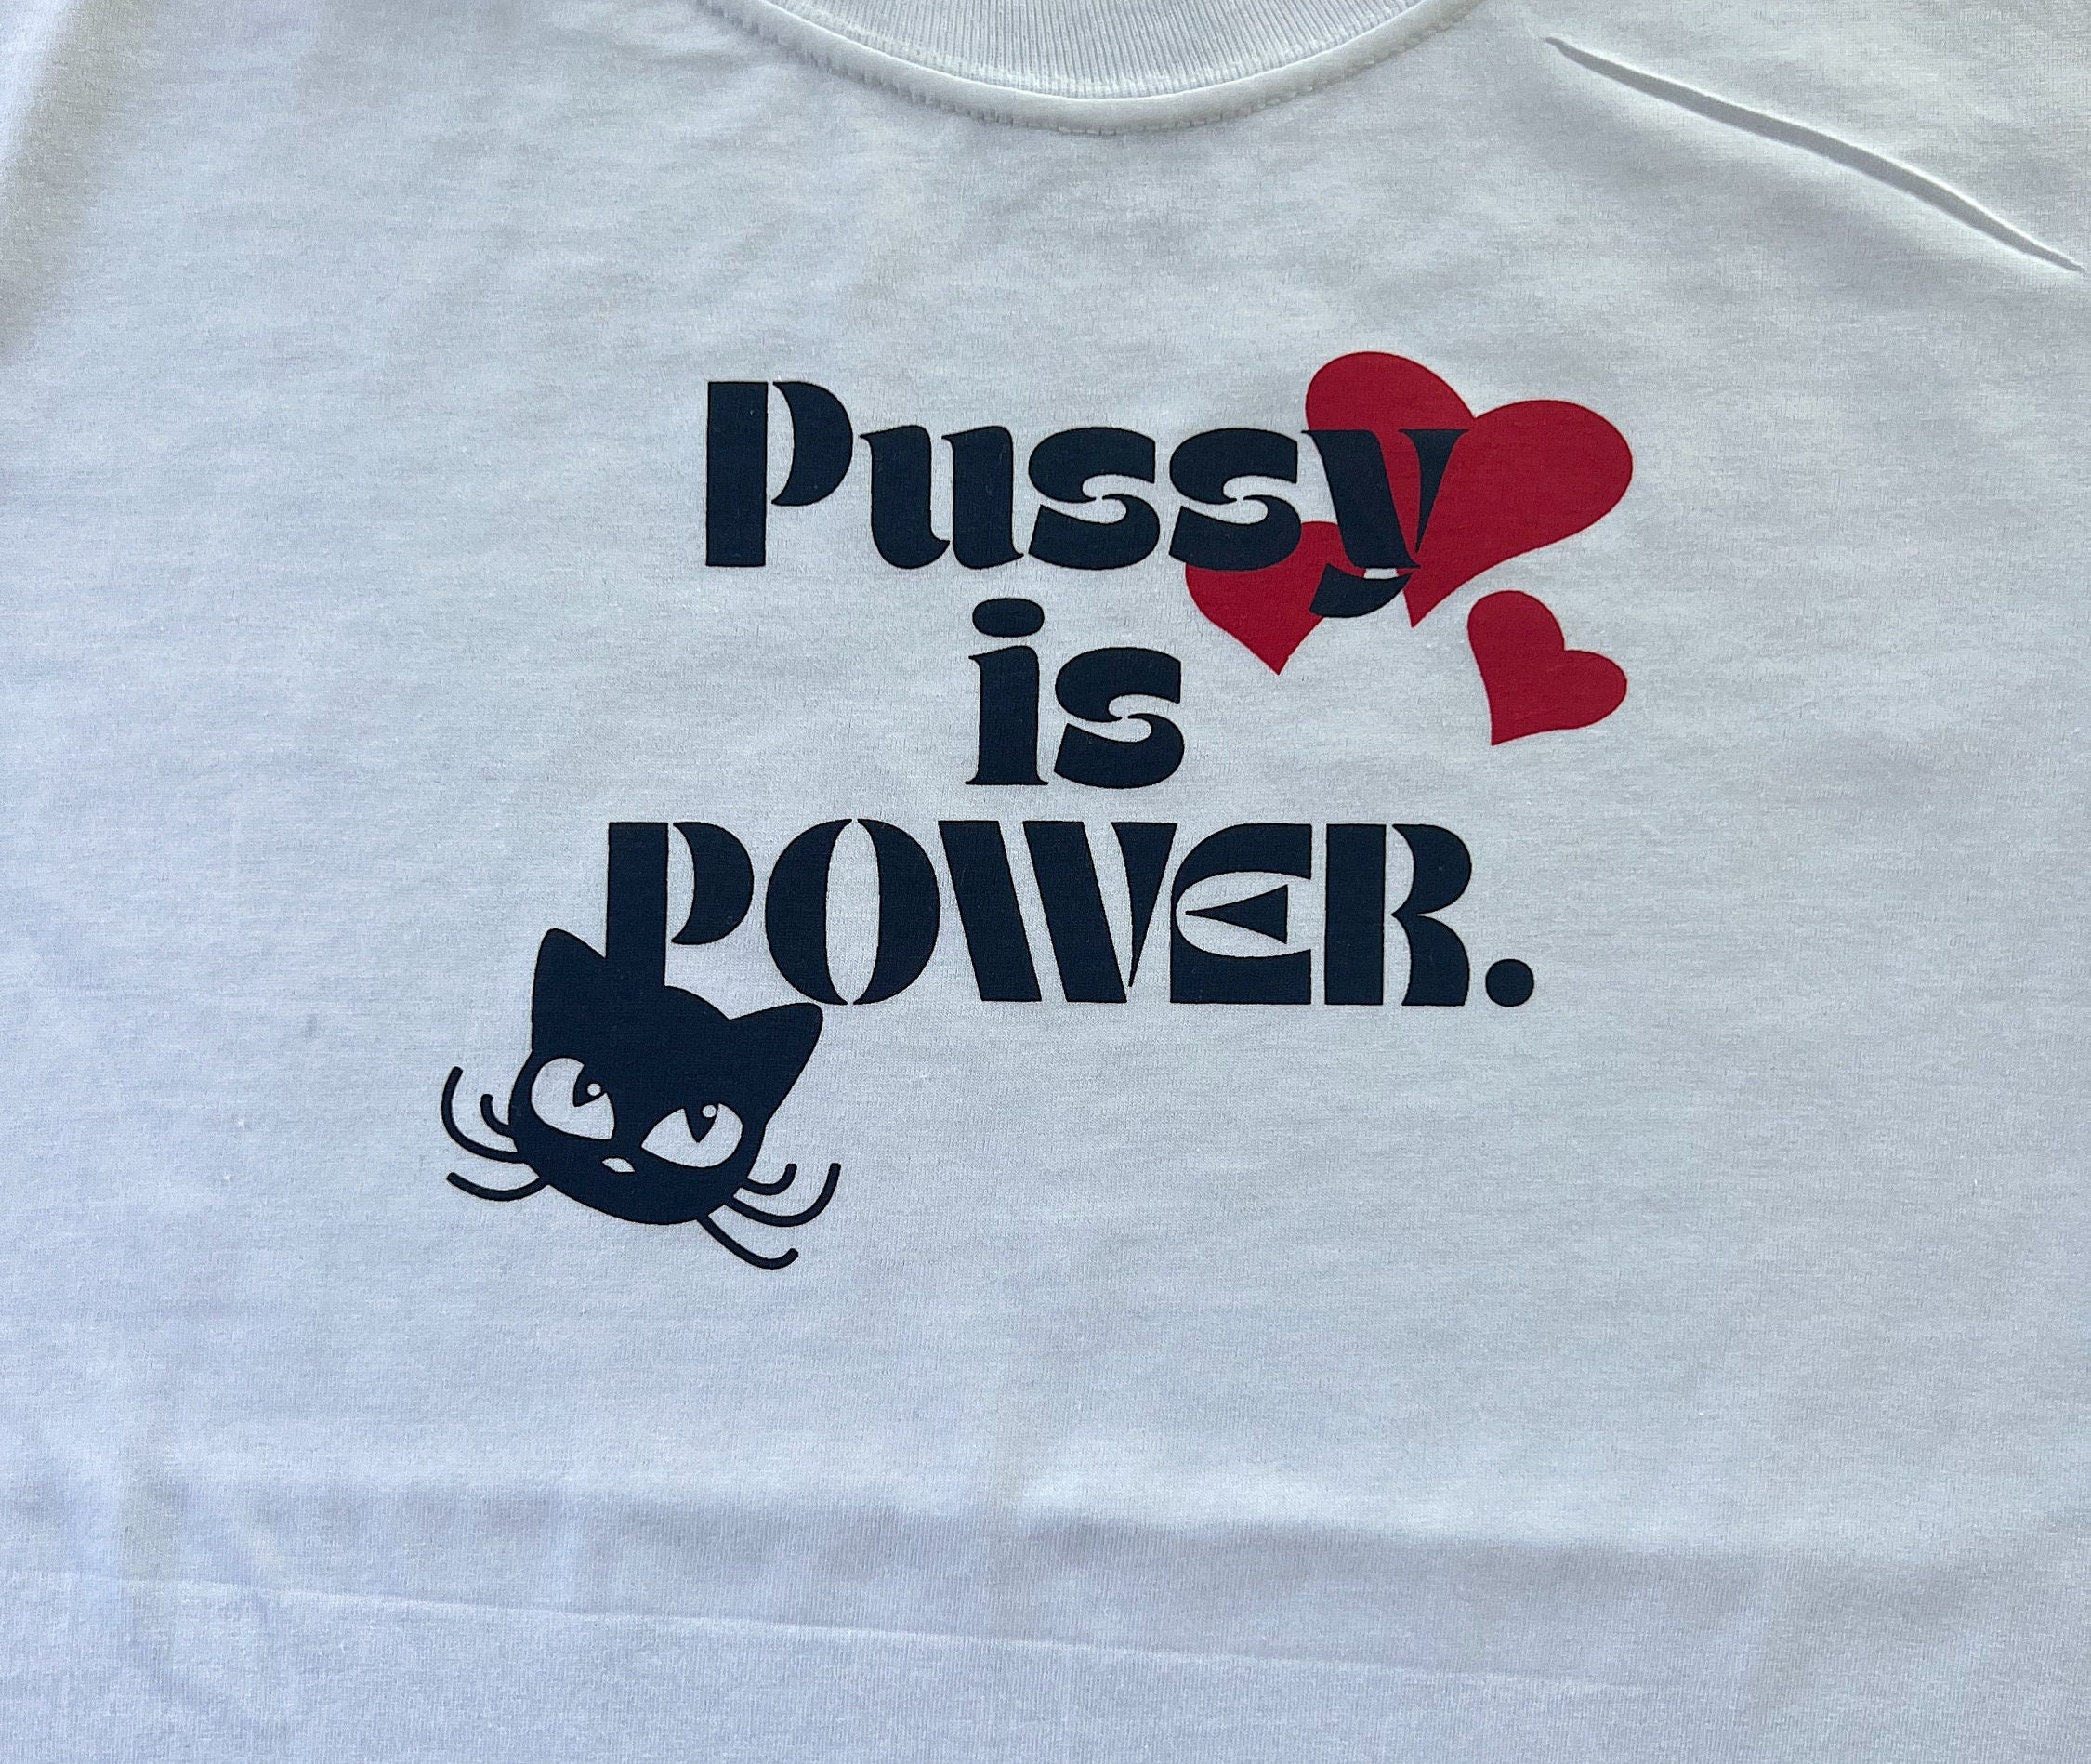 Vintage-inspired "Pussy Power" Baby Tee - Y2K Clothing